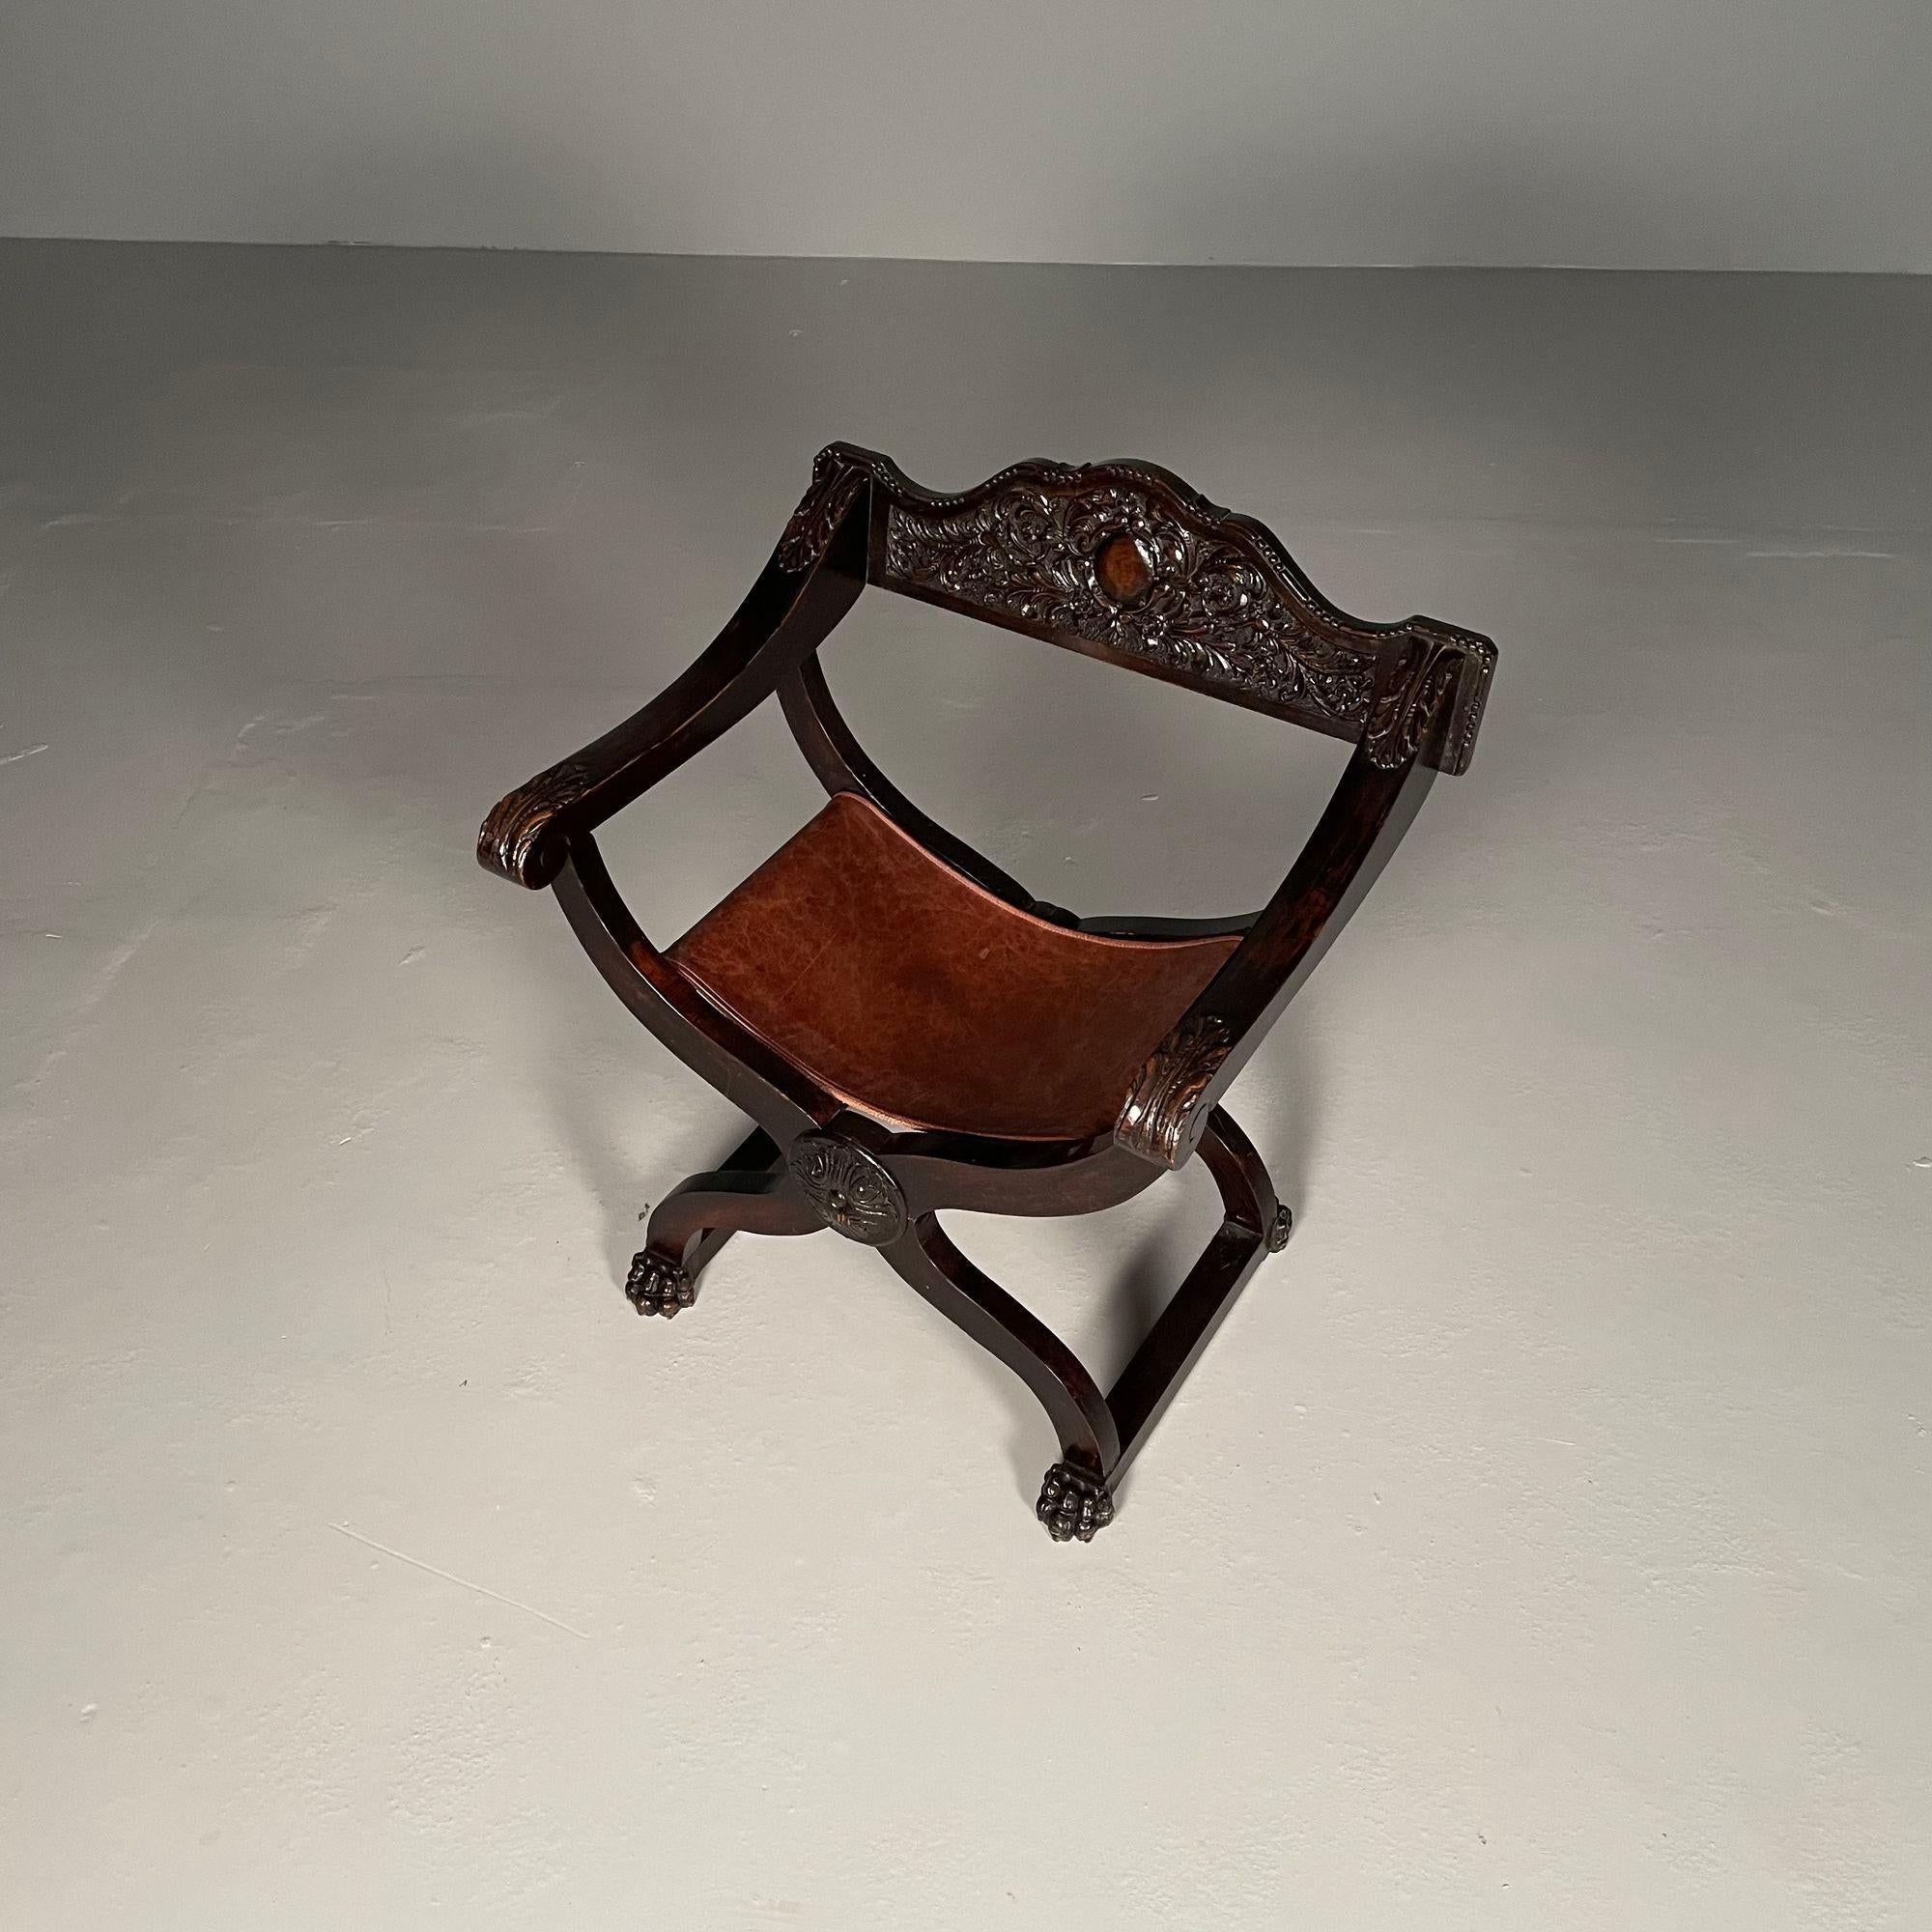 Italian Renaissance Arm / Office Chair, Carved, Leather Seat, 19th Century

A finely carved example having a worn, in good condition, leather seating area framed in a finely carved setting.

H32.5. W29 Depth 21. SH 17